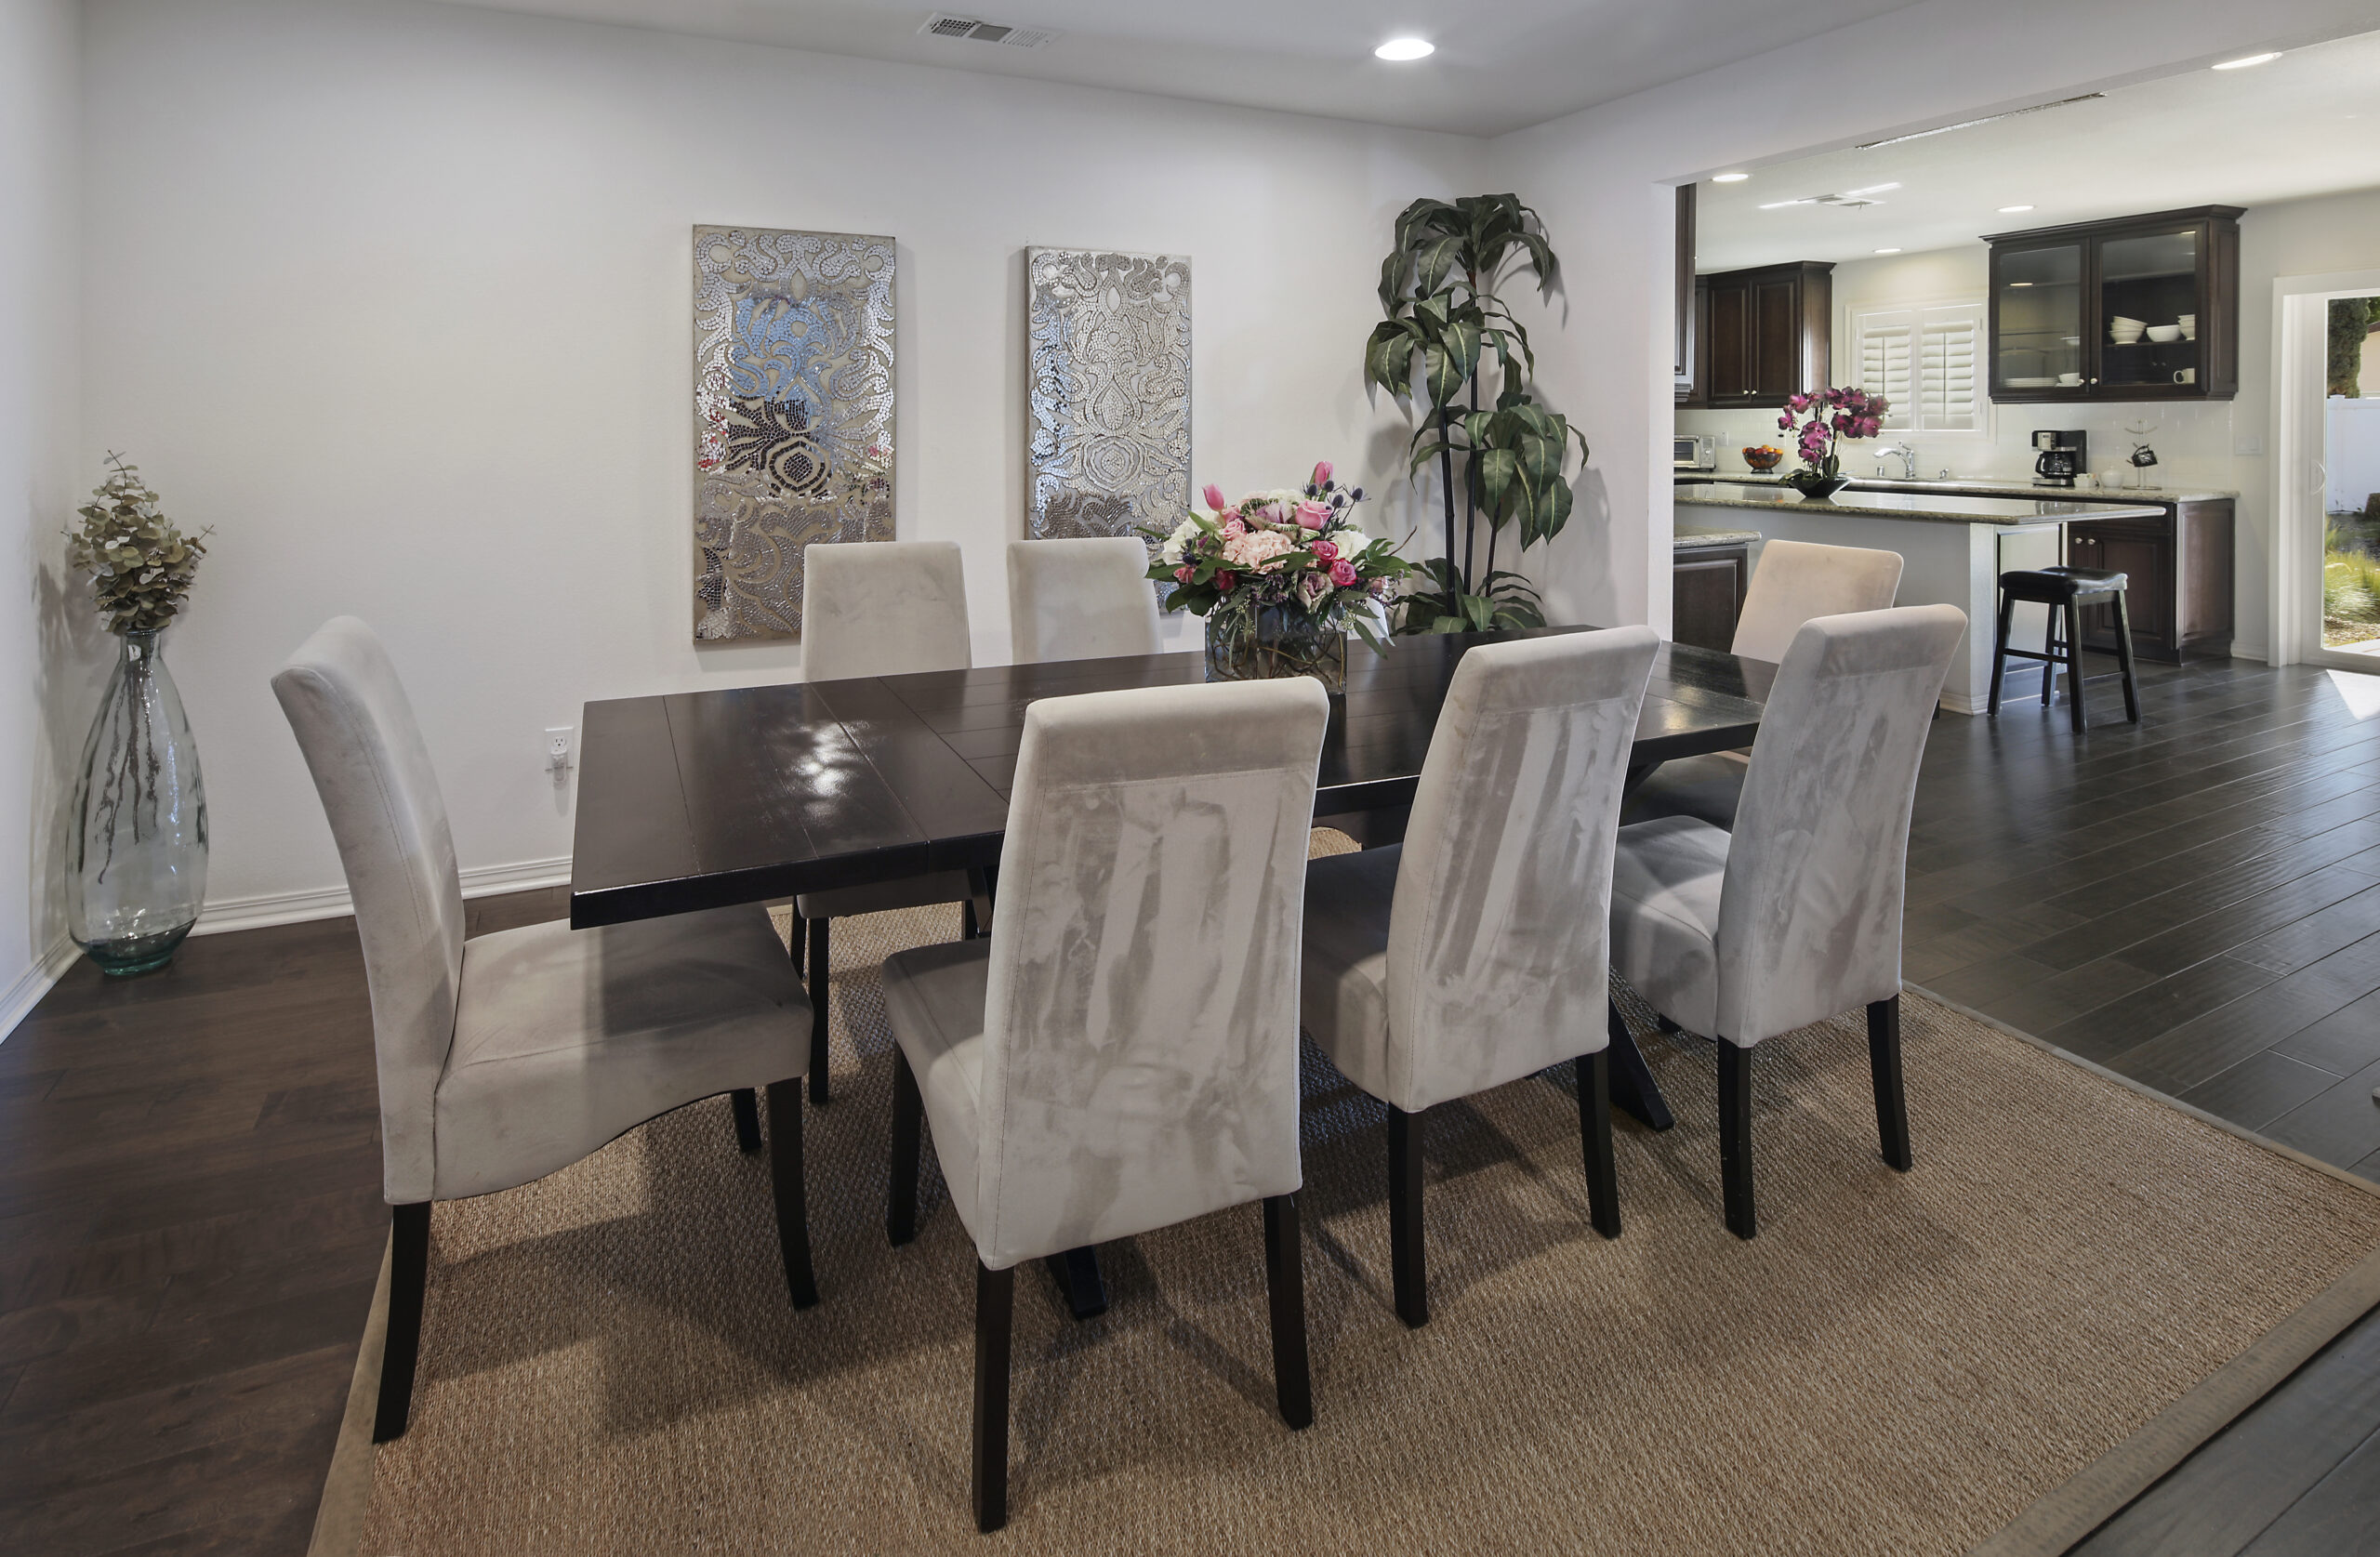 Gray dining room chairs and black table in young peoples treatment center